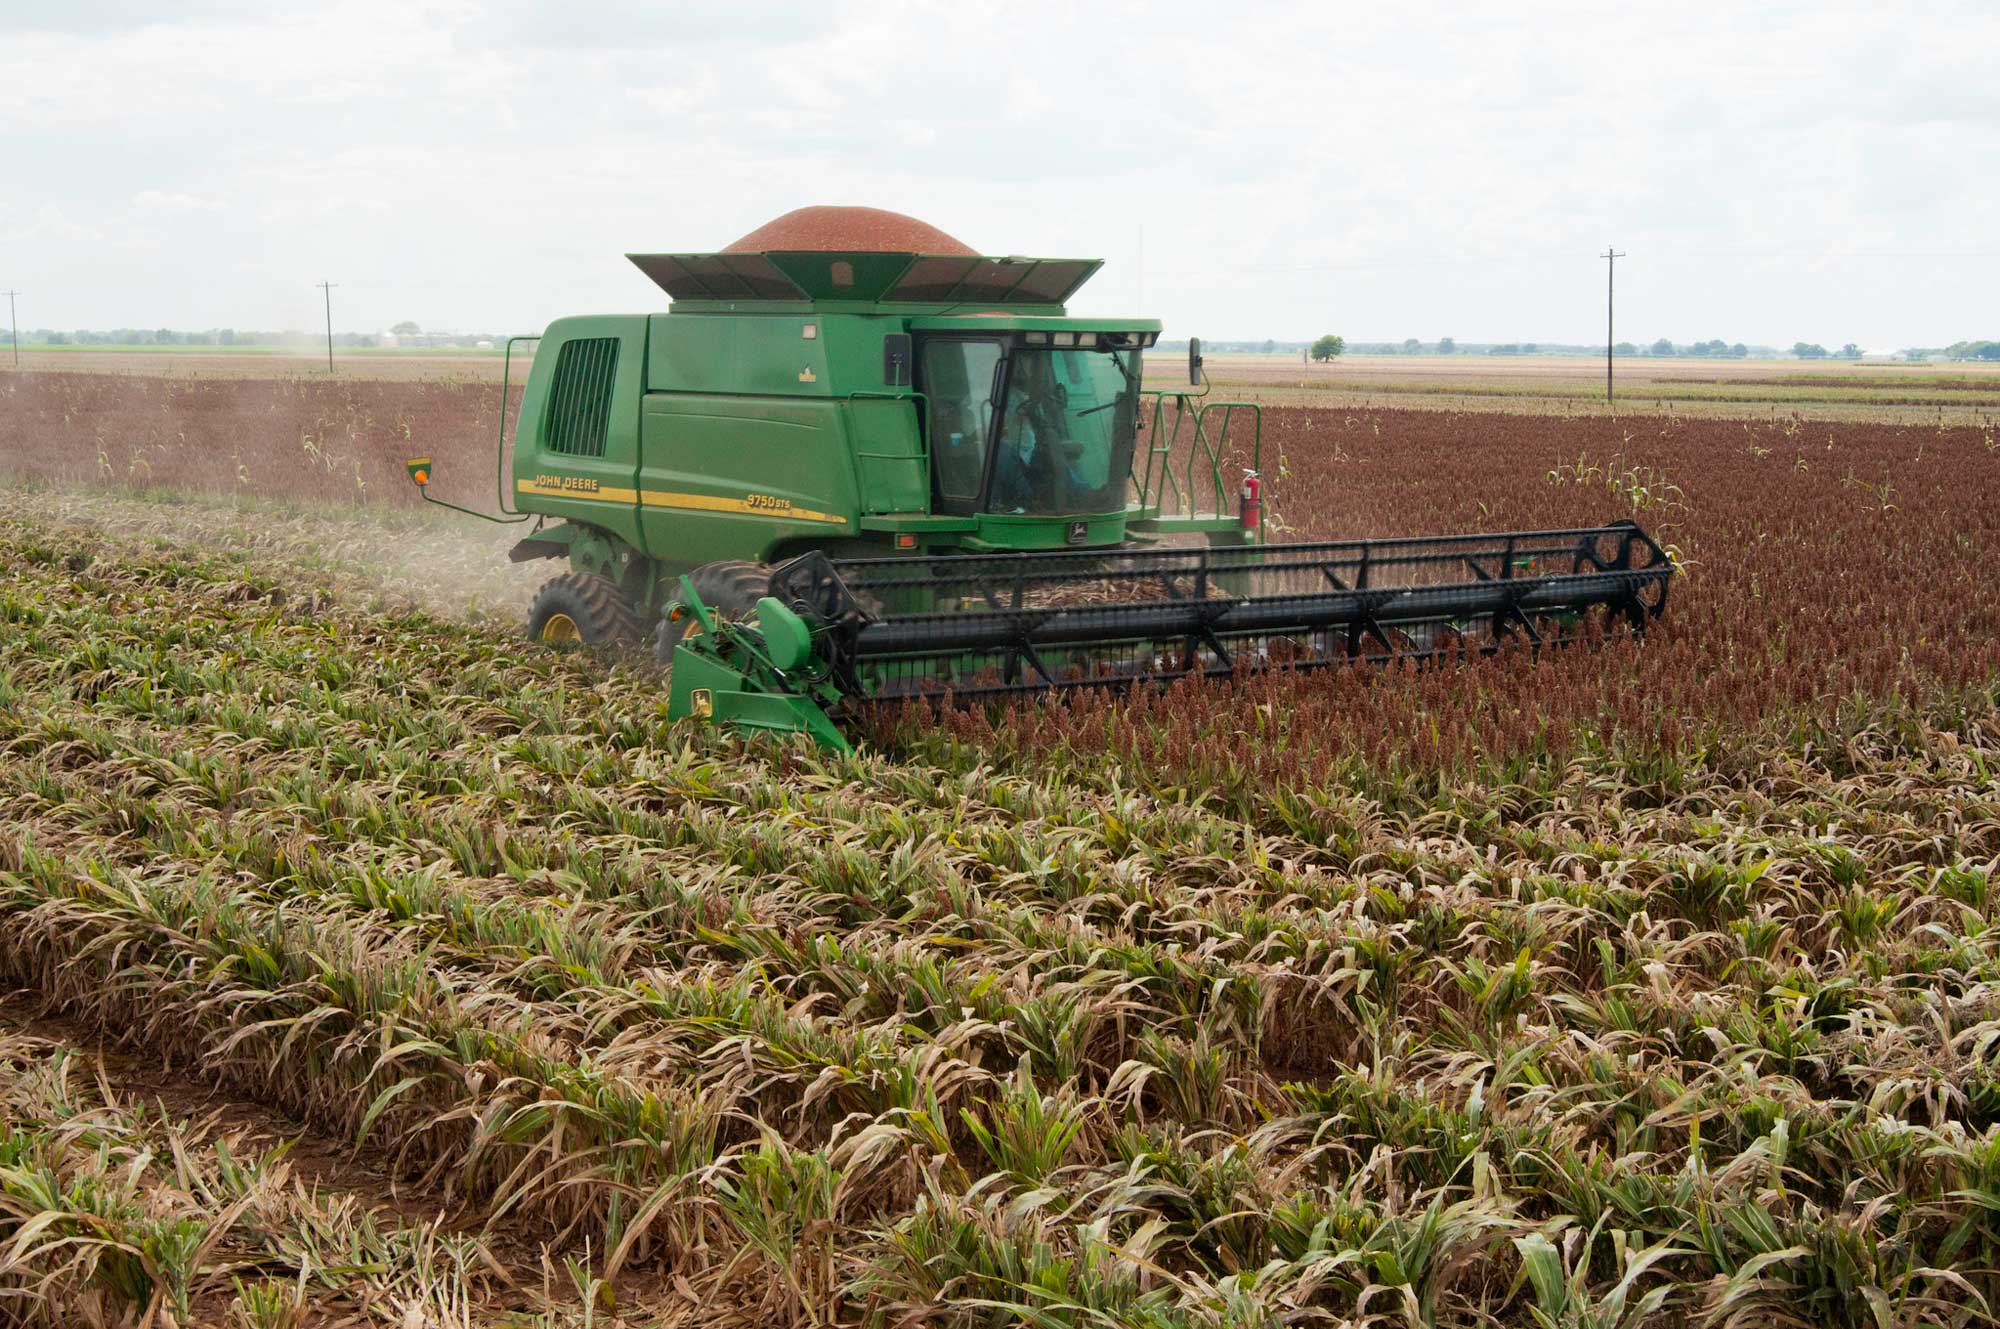 Photograph of the sorghum harvest on a farm in Navasota, Texas. The photo shows a green and yellow combine cutting ears of sorghum off the tops of sorghum plants. A pile of red grain can be seen mounded on top of the combine. The ears on the plants nearer the viewer have already been harvested.